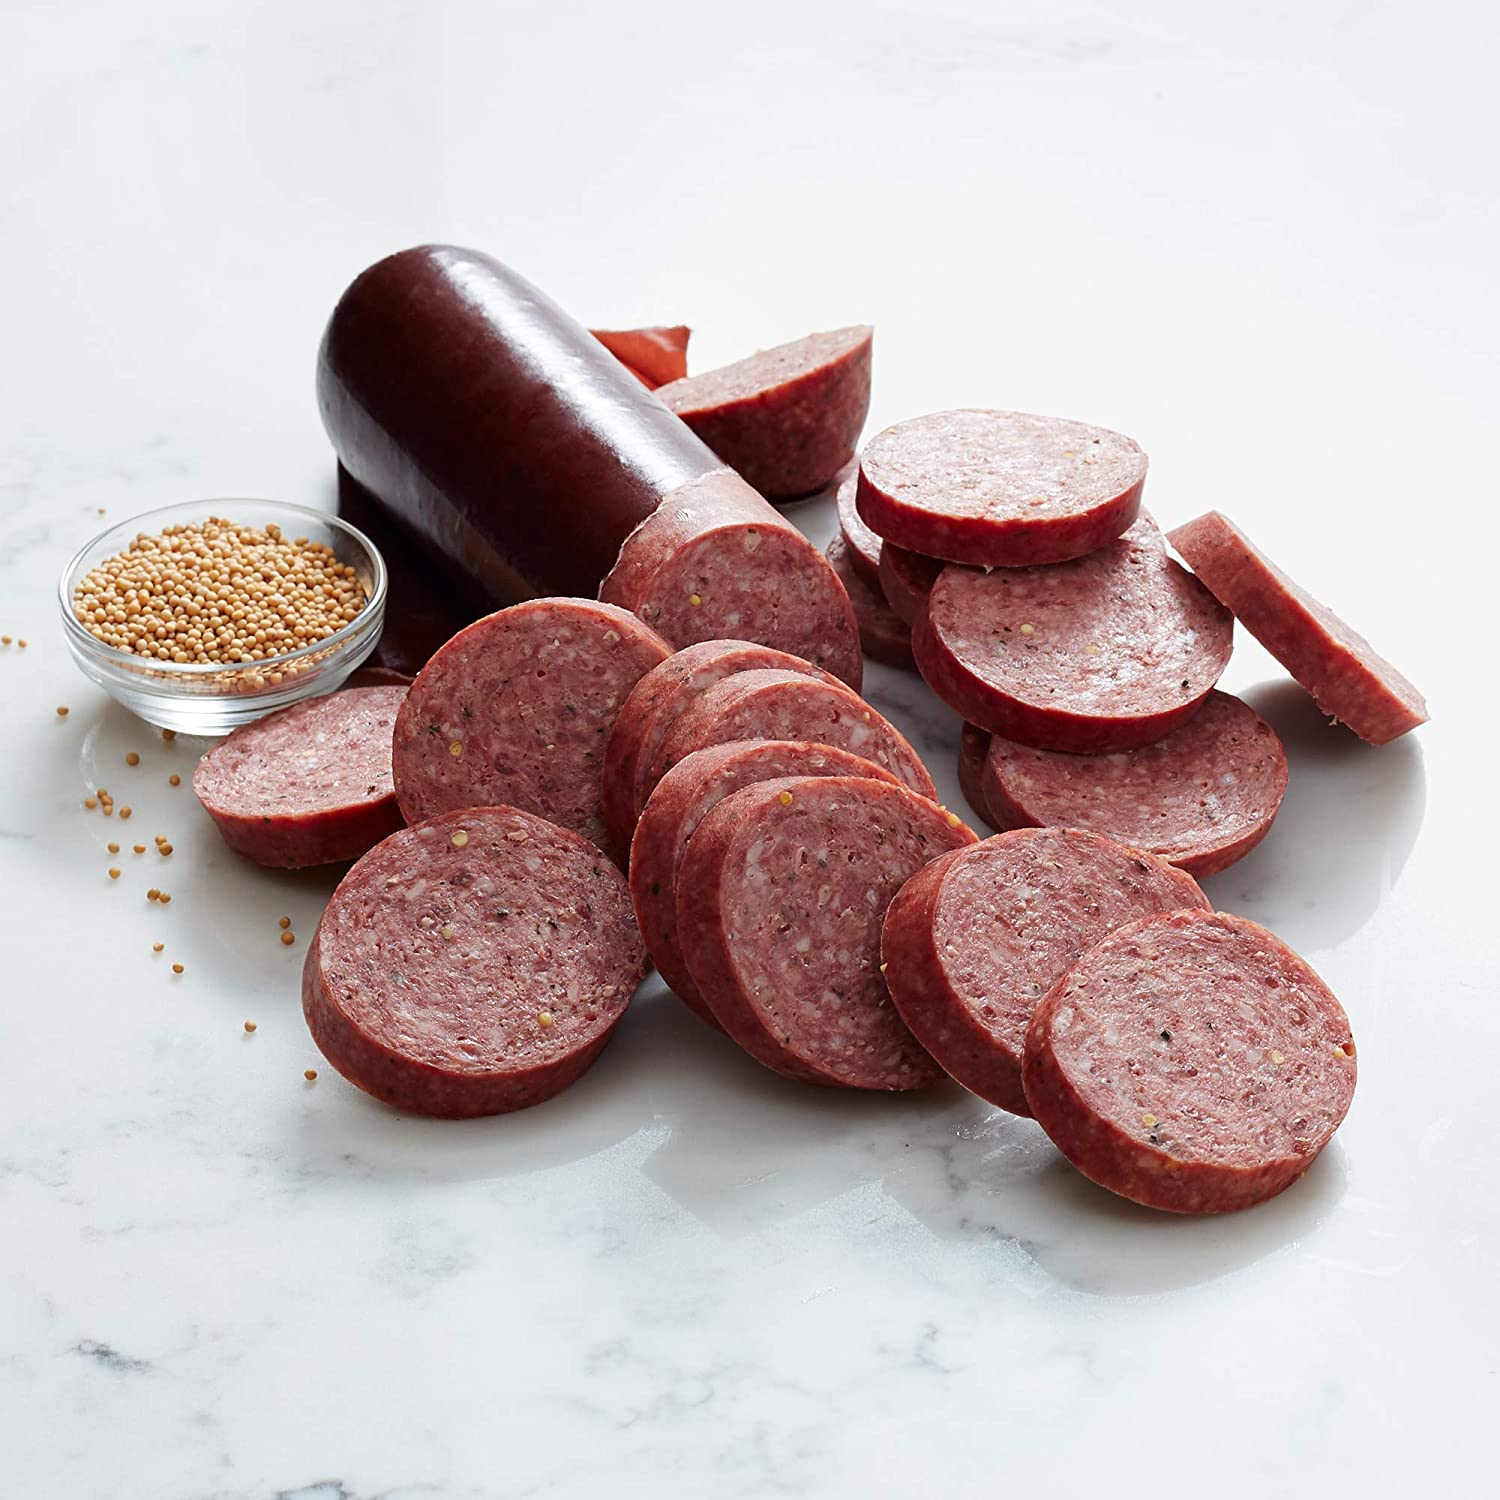 Does Summer Sausage Need To Be Refrigerated